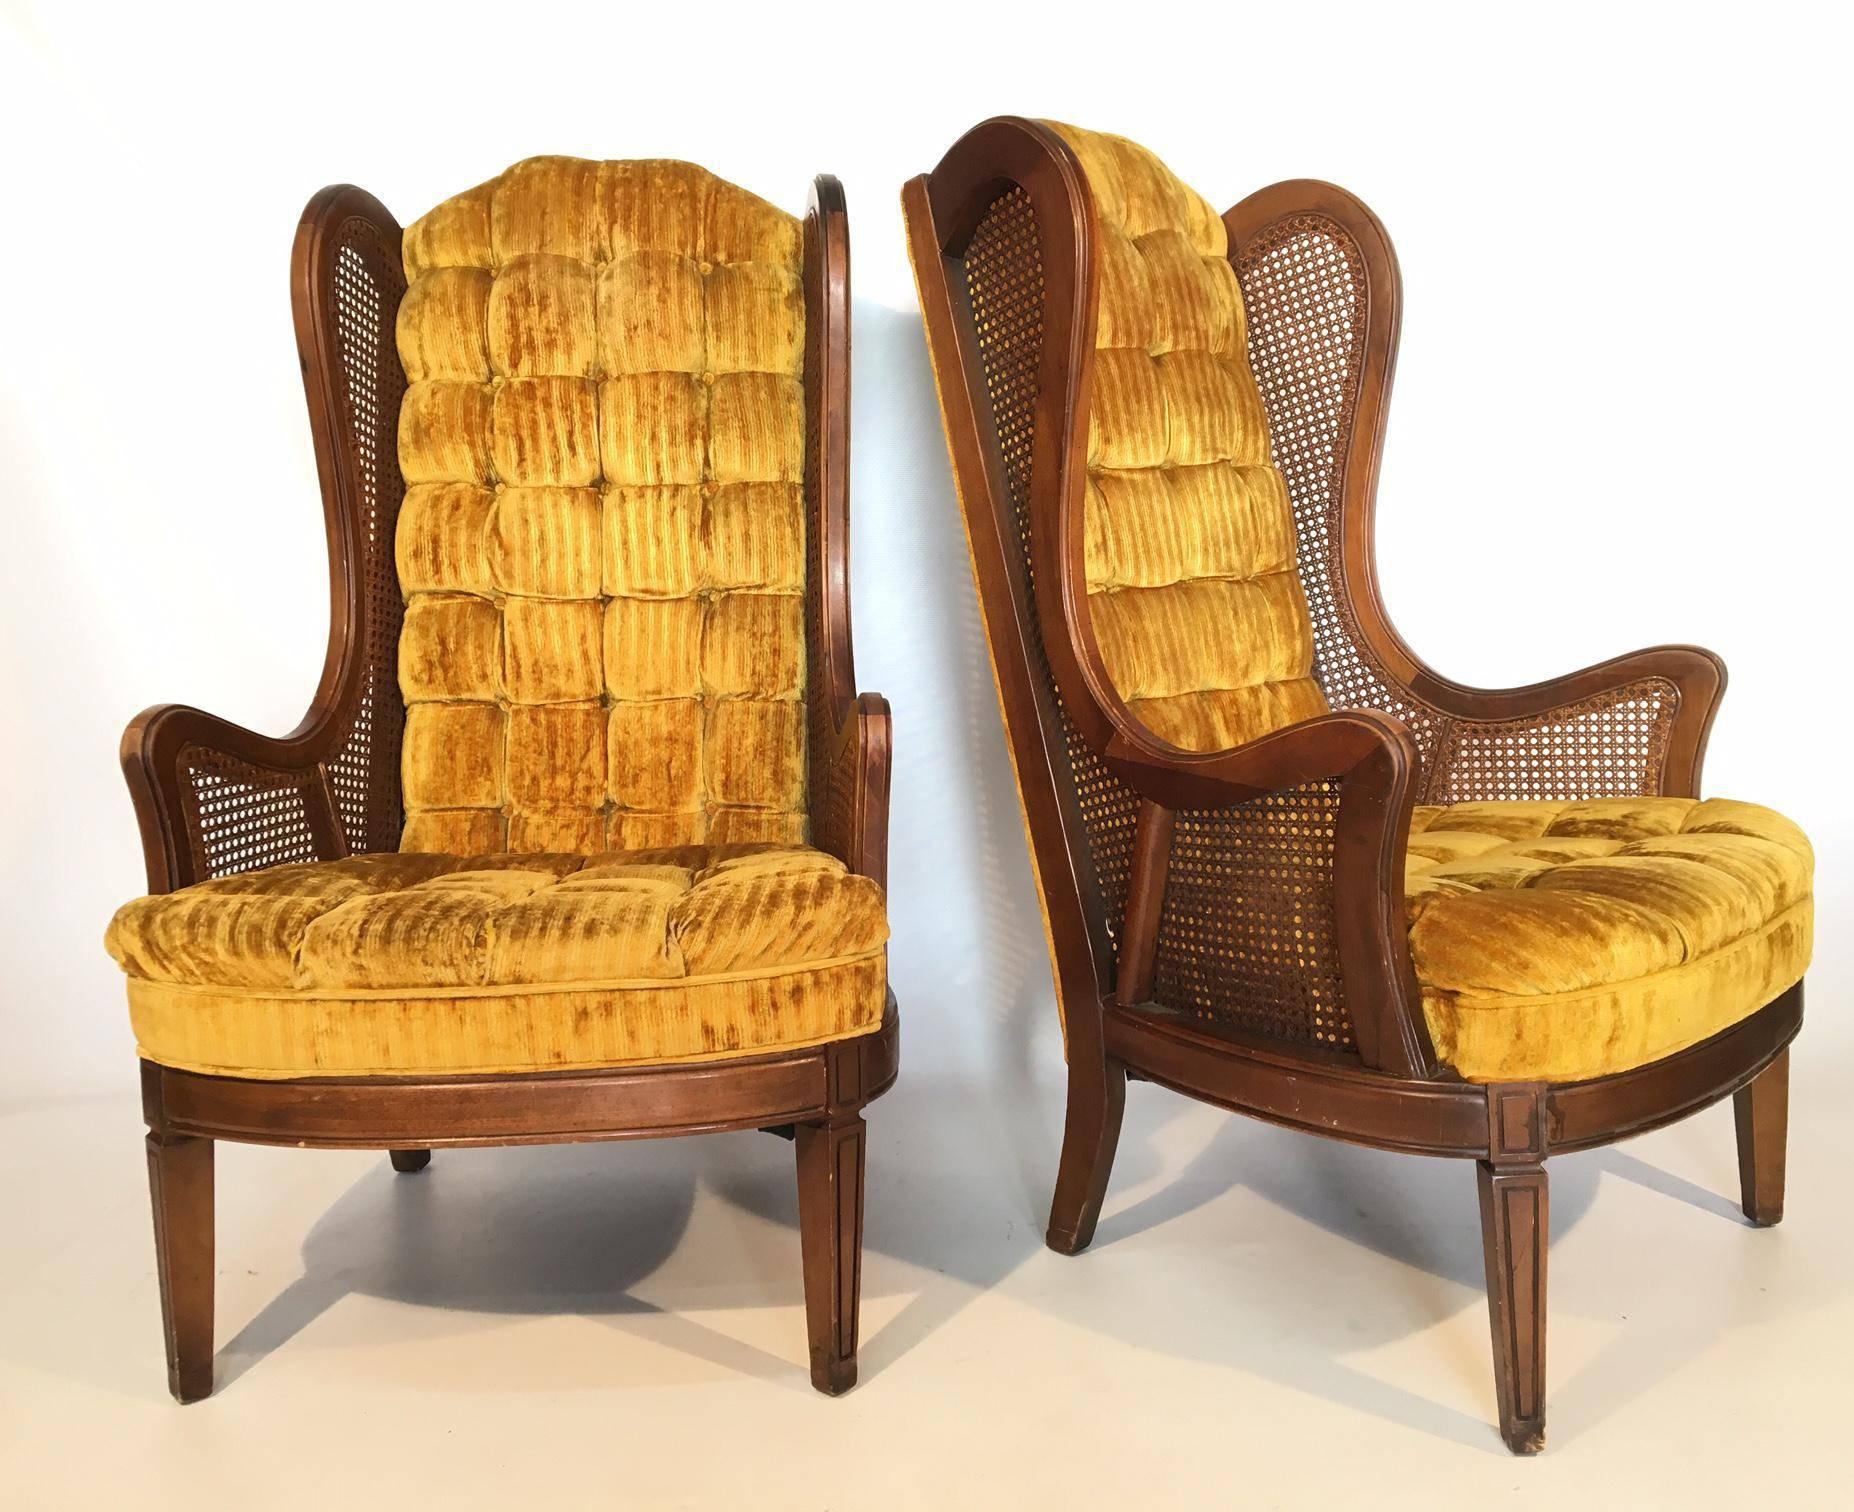 Pair of Lewittes cane wingback chairs in gold velvet. Features full tufting from back to seat. Caning in near perfect condition. Upholstery in excellent condition and frame also in excellent condition, save for the slight wear on